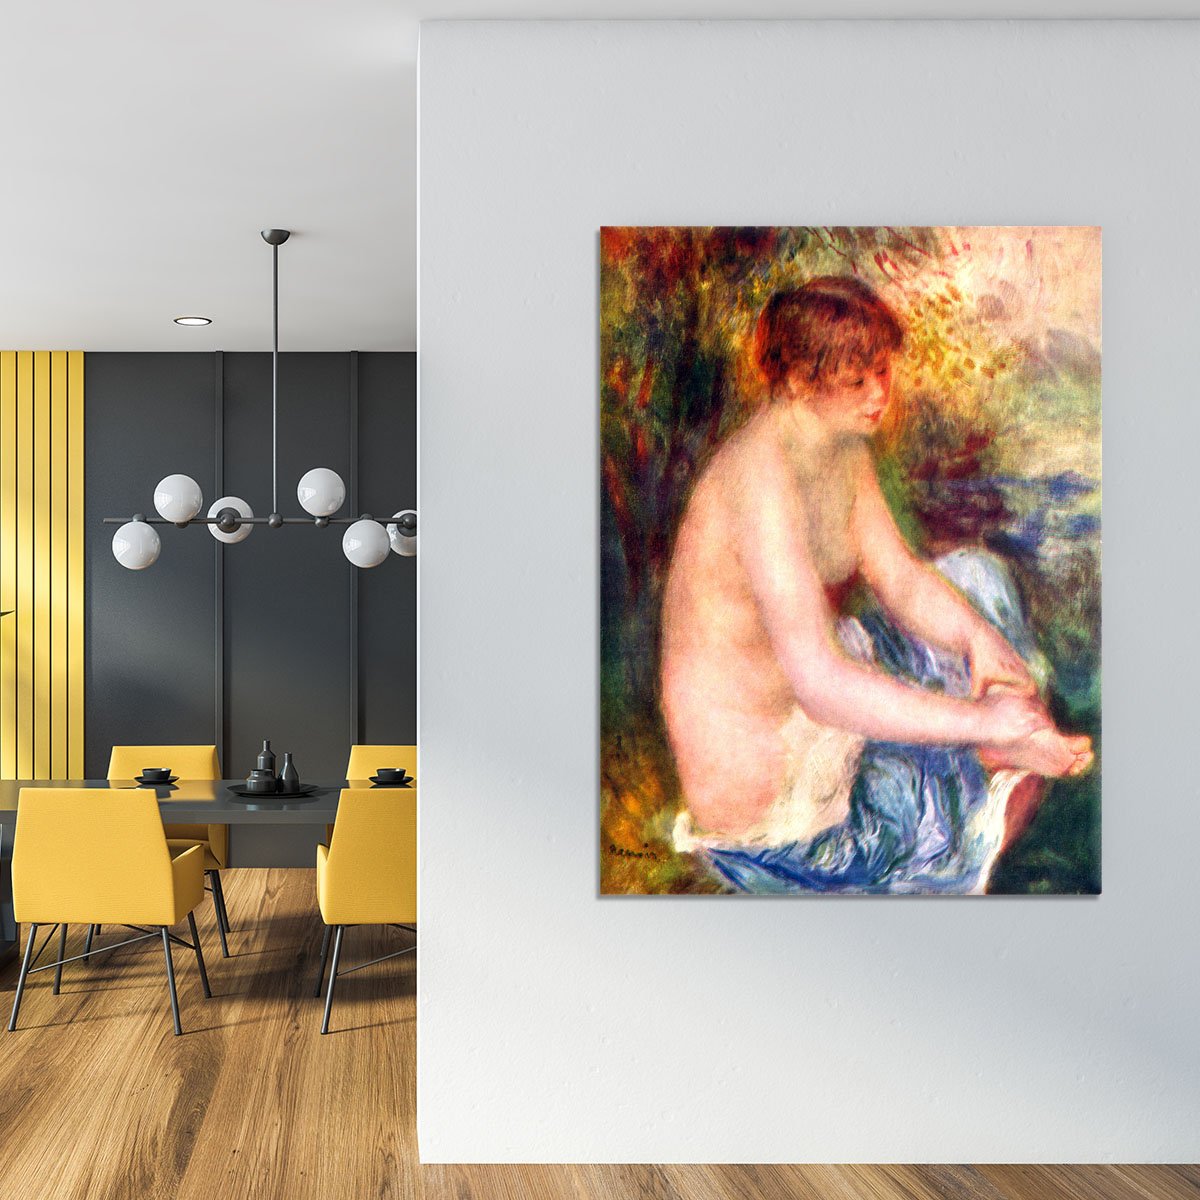 Nude in blue by Renoir Canvas Print or Poster